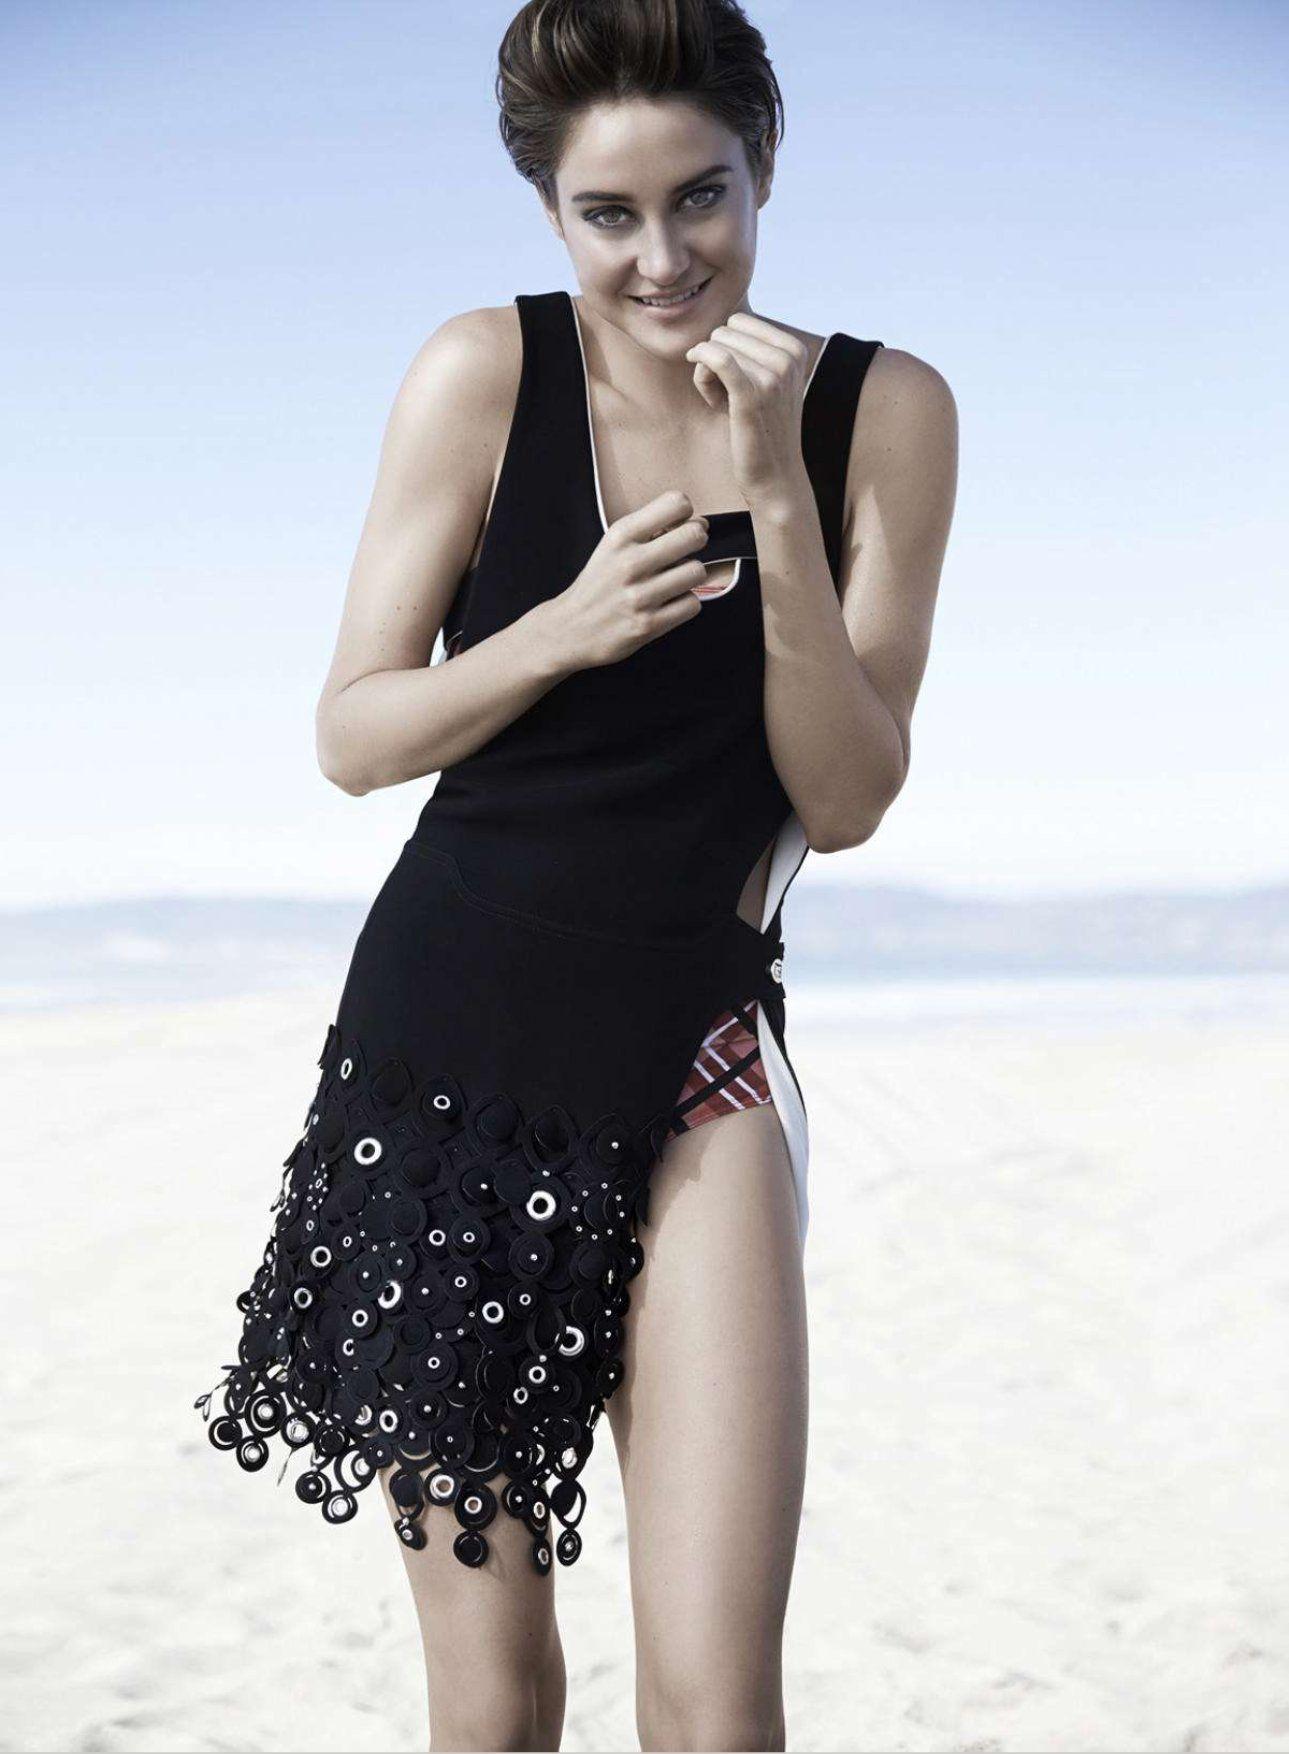 49 Hottest Shailene Woodley Bikini Pictures Are Delight For Fans | Best Of Comic Books